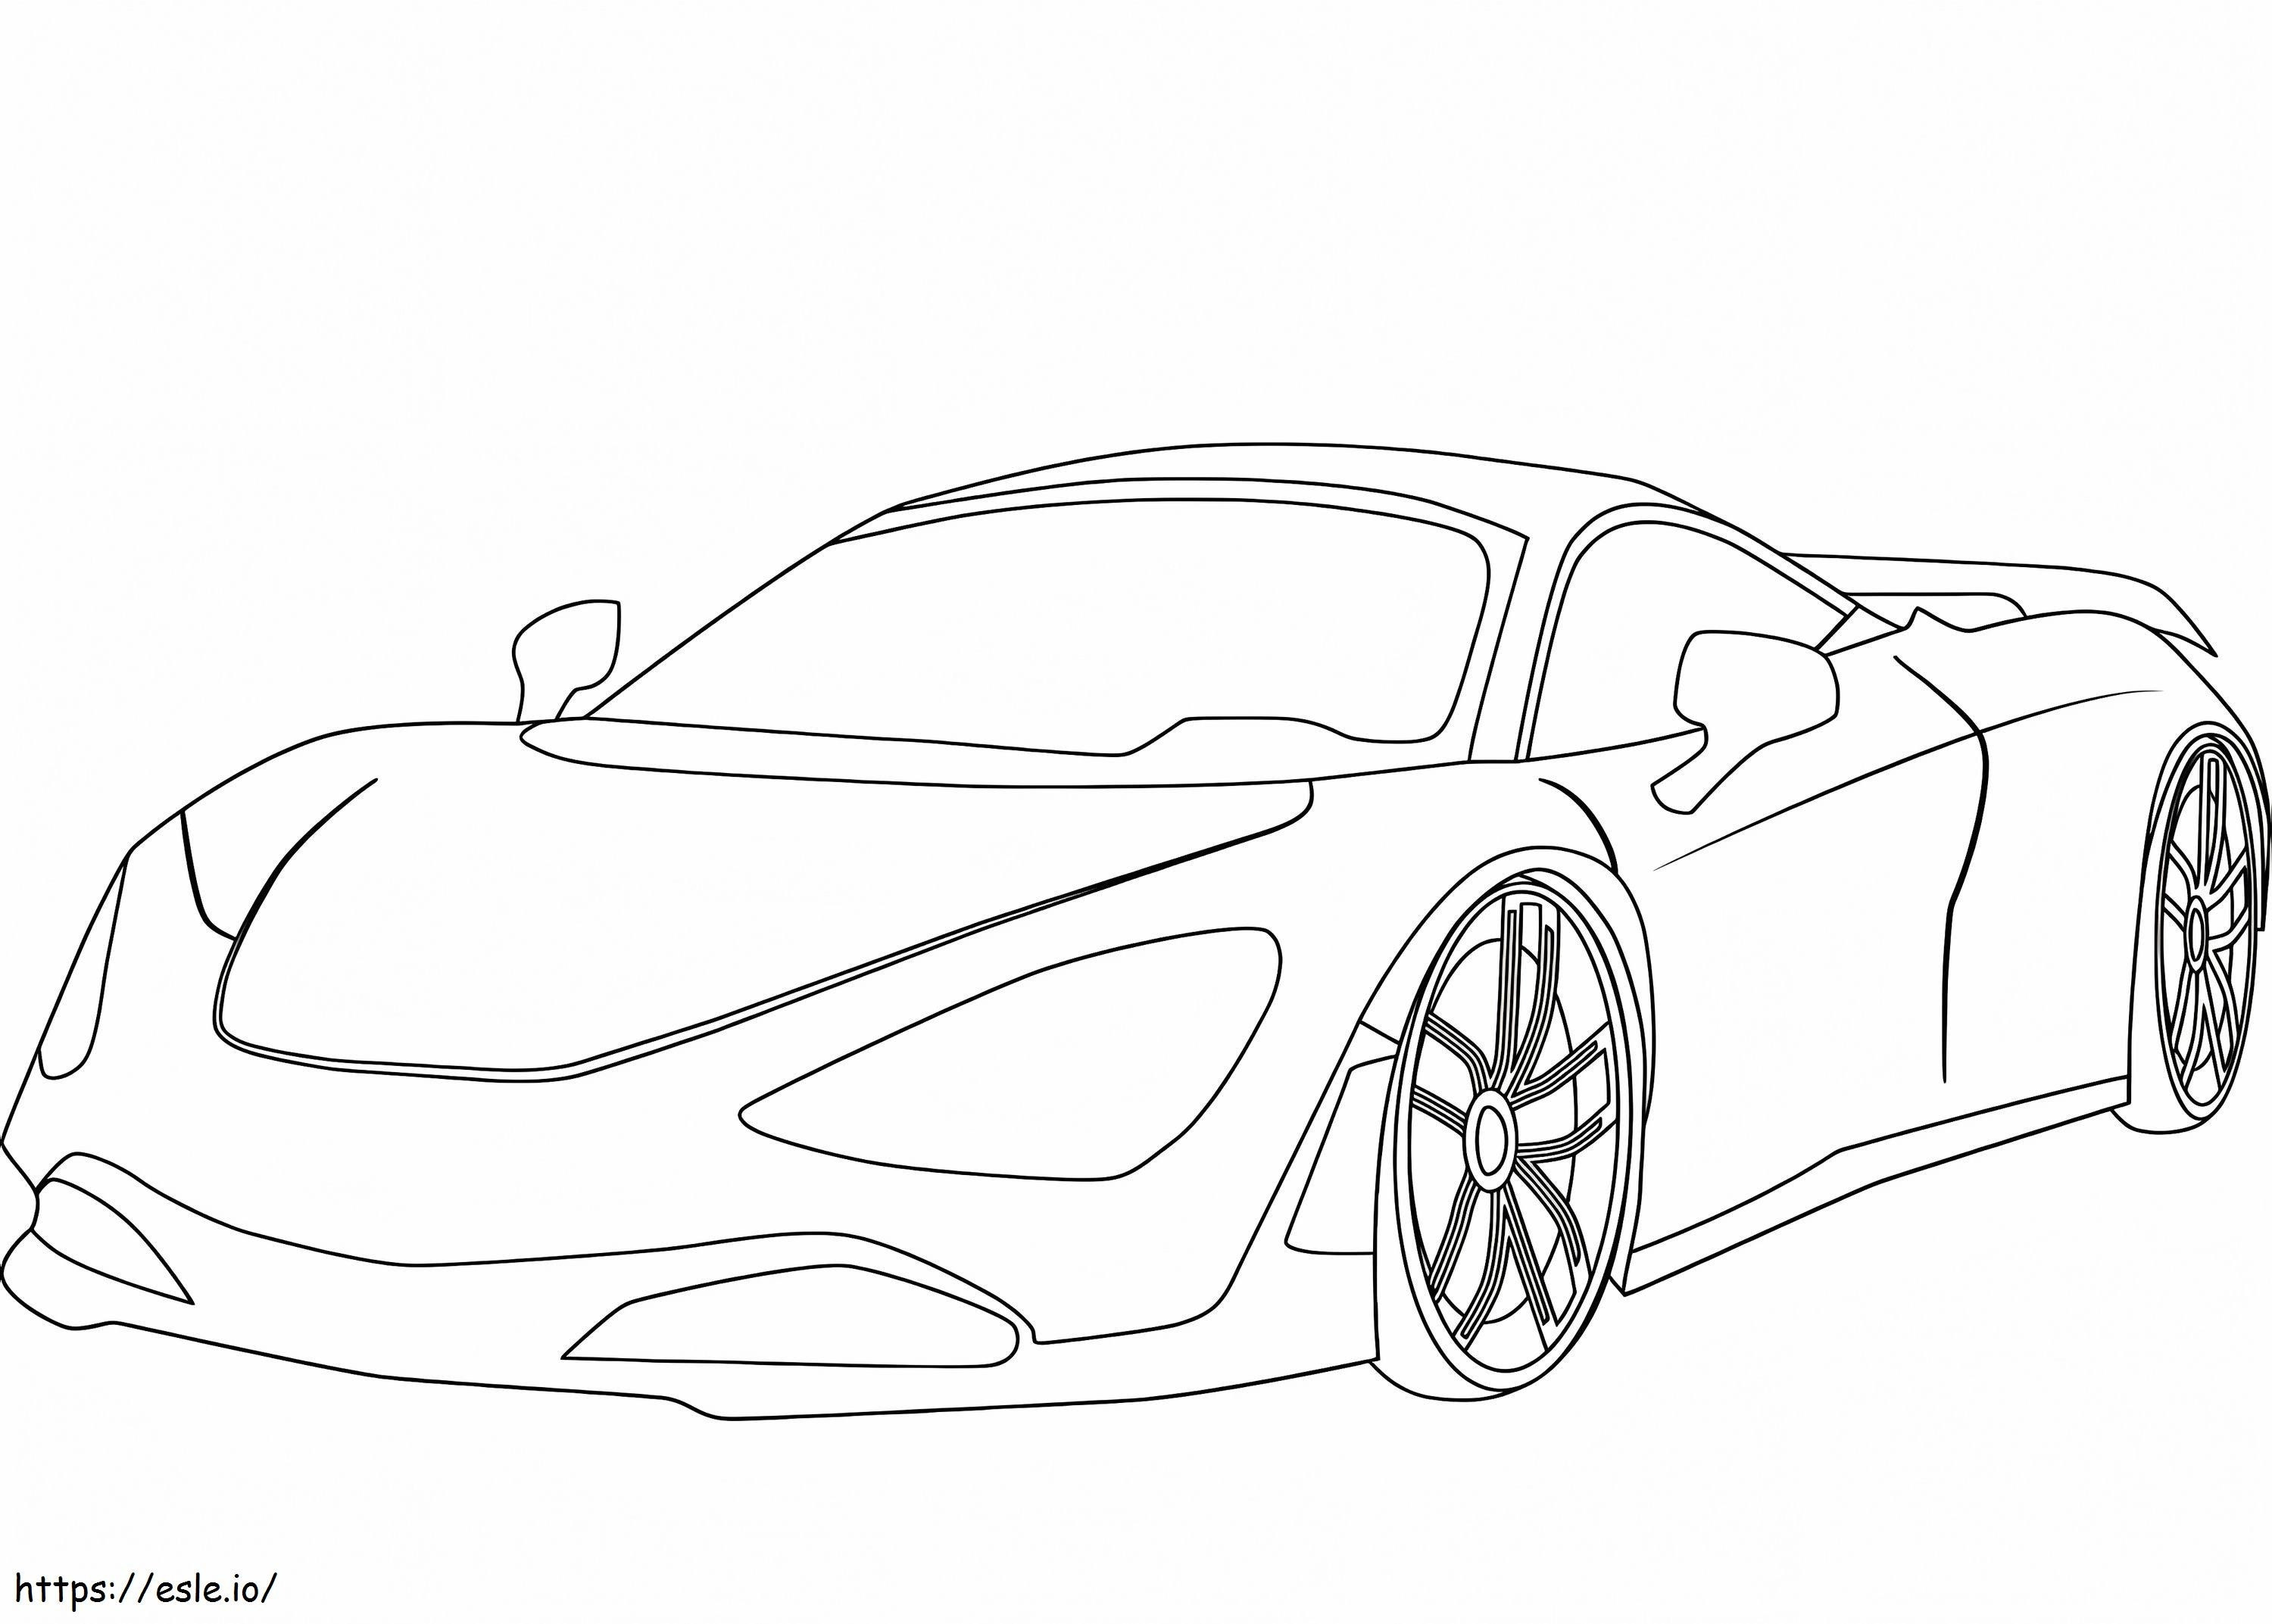 F Mclaren Mercedes Coloring Page Wecoloringpage The Best Porn Website